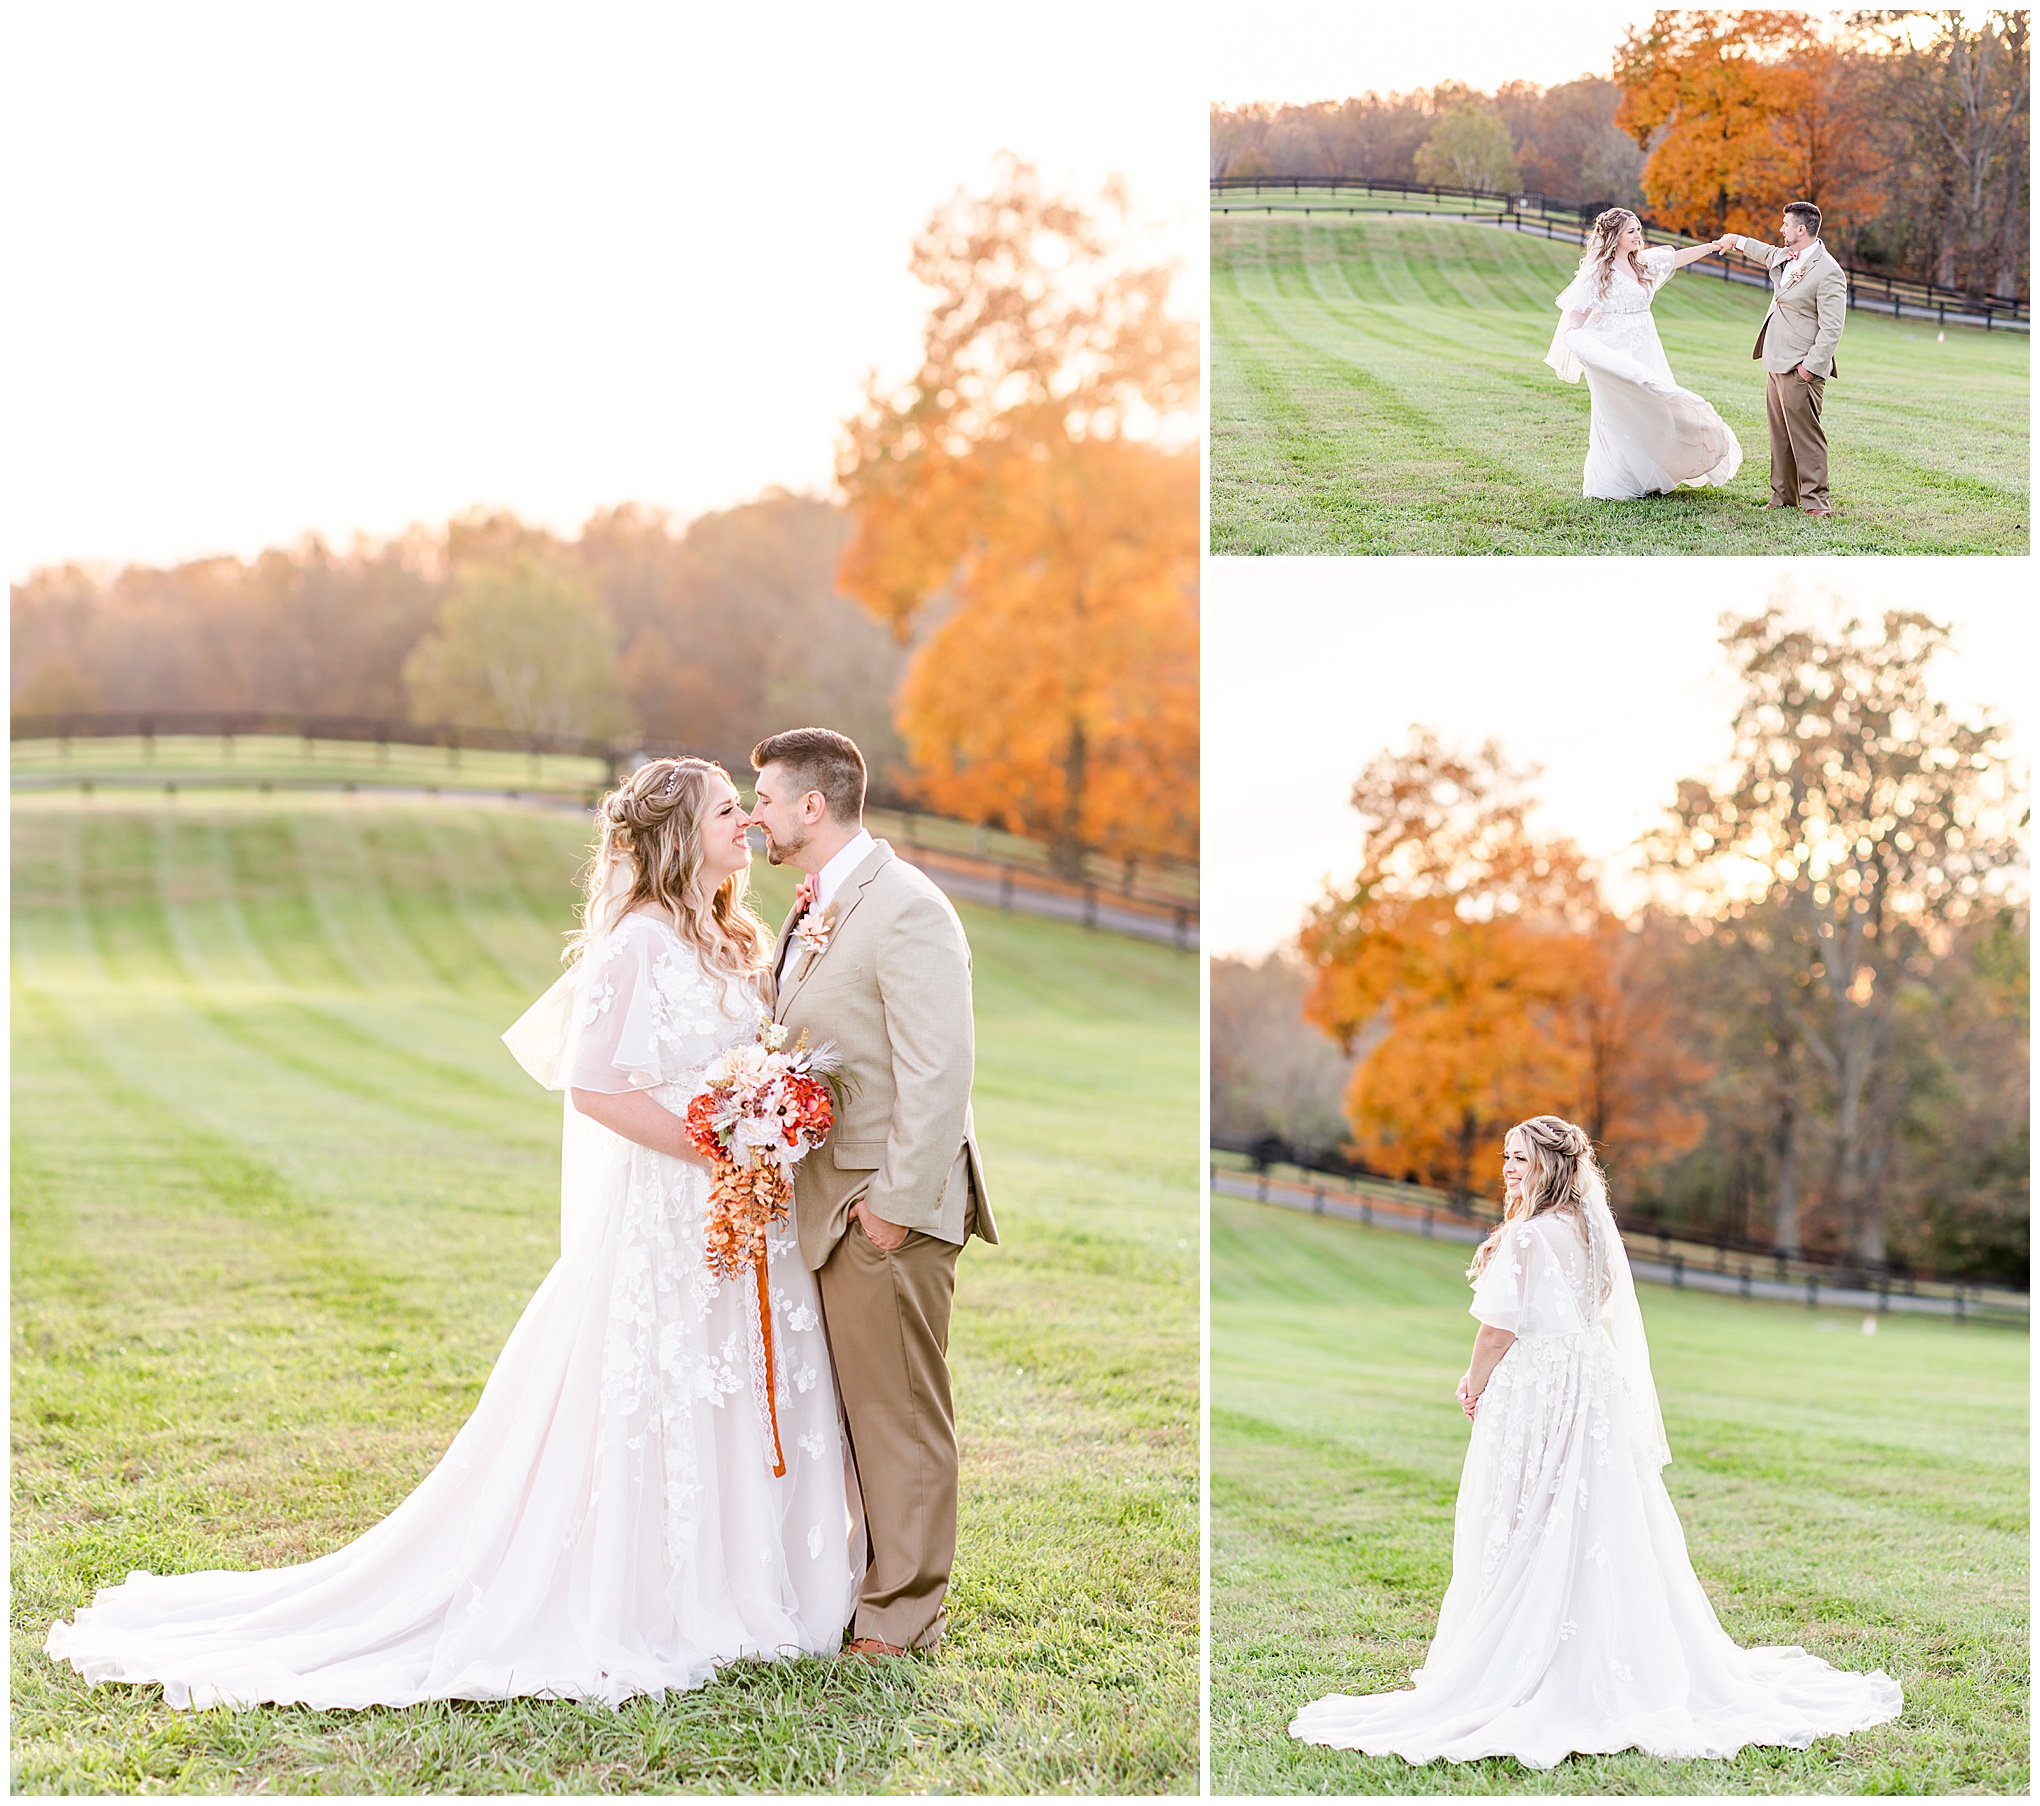 fall colors Middleburg Virginia wedding, Middleburg wedding, Middleburg wedding photographer, Loudoun County wedding photographer, northern Virginia wedding photographer, Middleburg Barn wedding, autumn wedding aesthetic, barn wedding aesthetic, elegant barn wedding, DC wedding photographer, Rachel E.H. Photography, groom spinning bride, bride and groom almost kissing, bride looking into distance